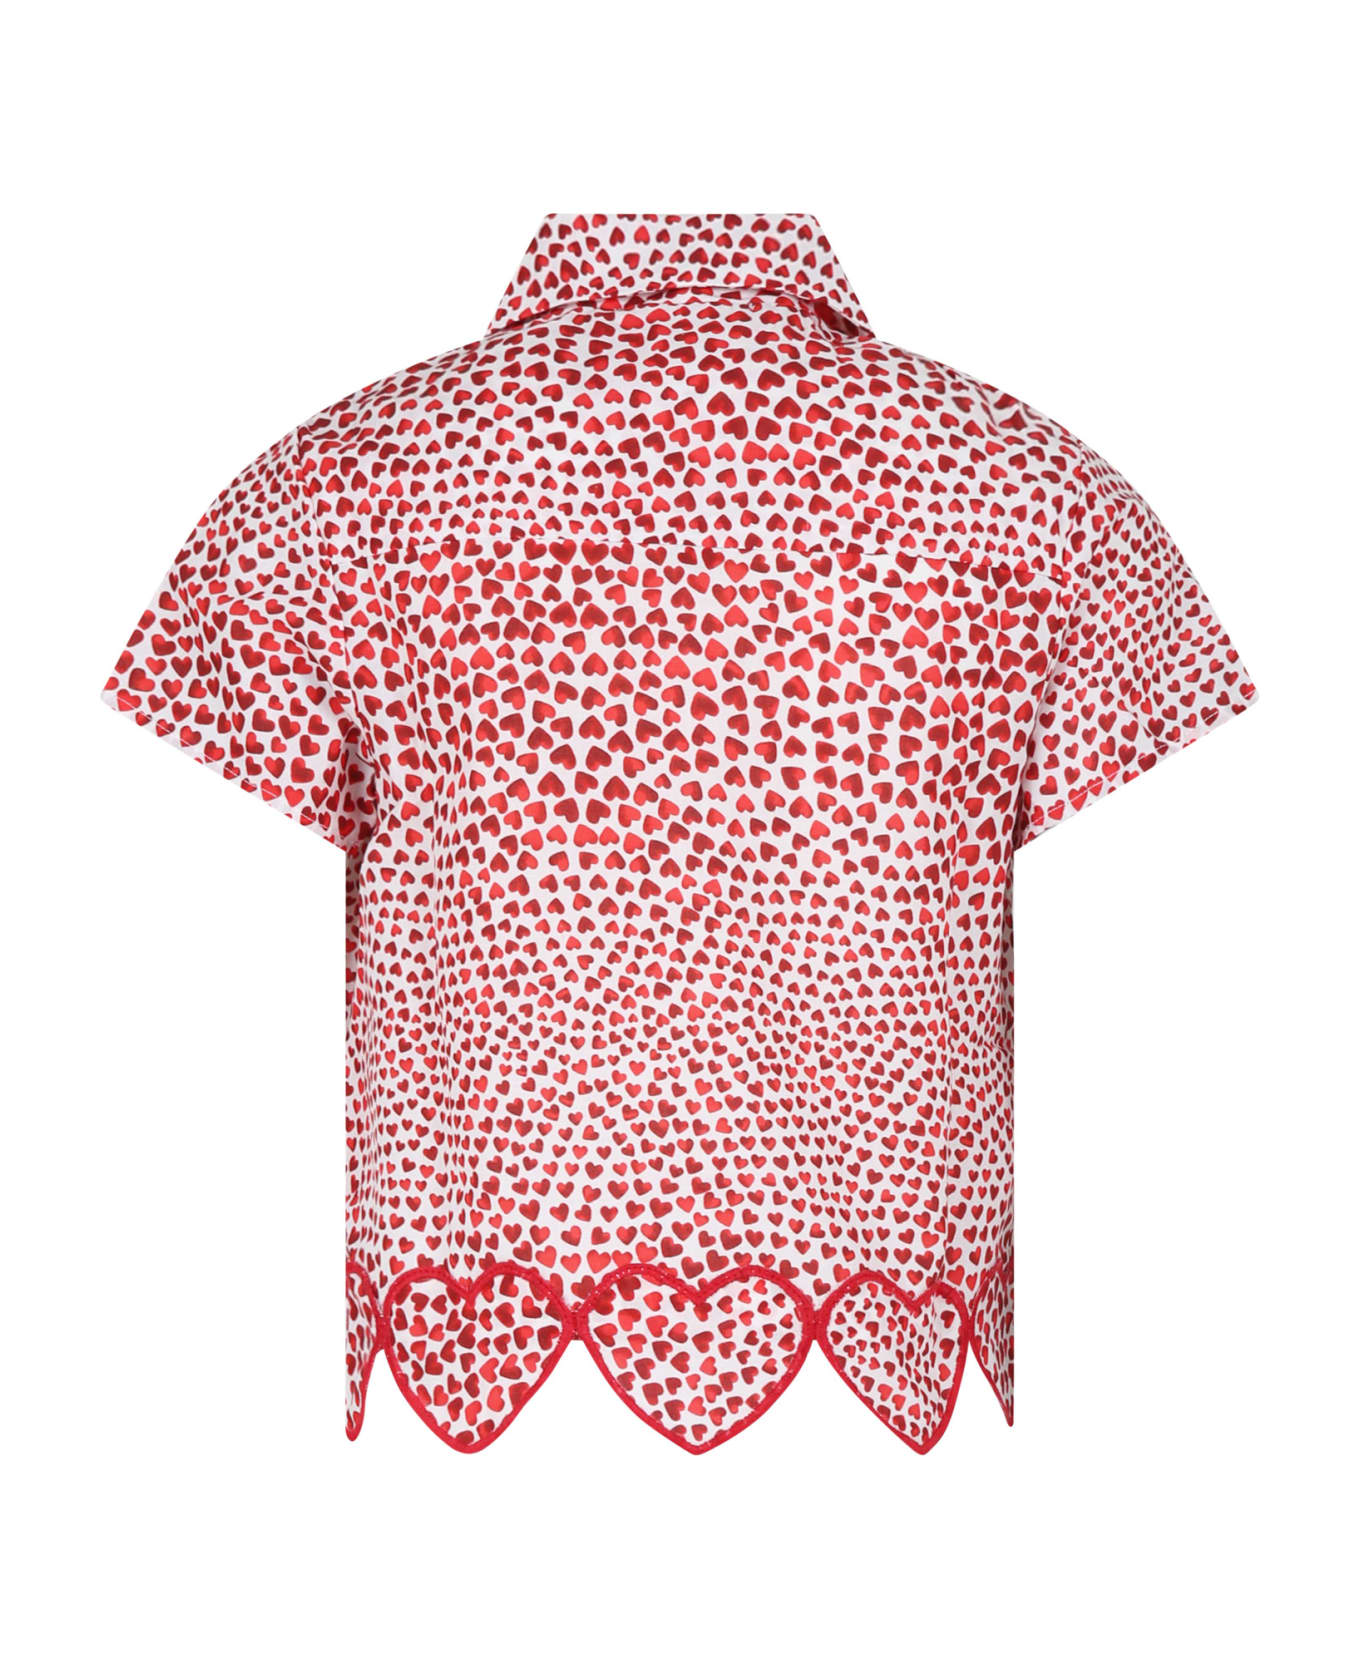 Stella McCartney Kids Red Shirt For Girl With Hearts Print - Red シャツ